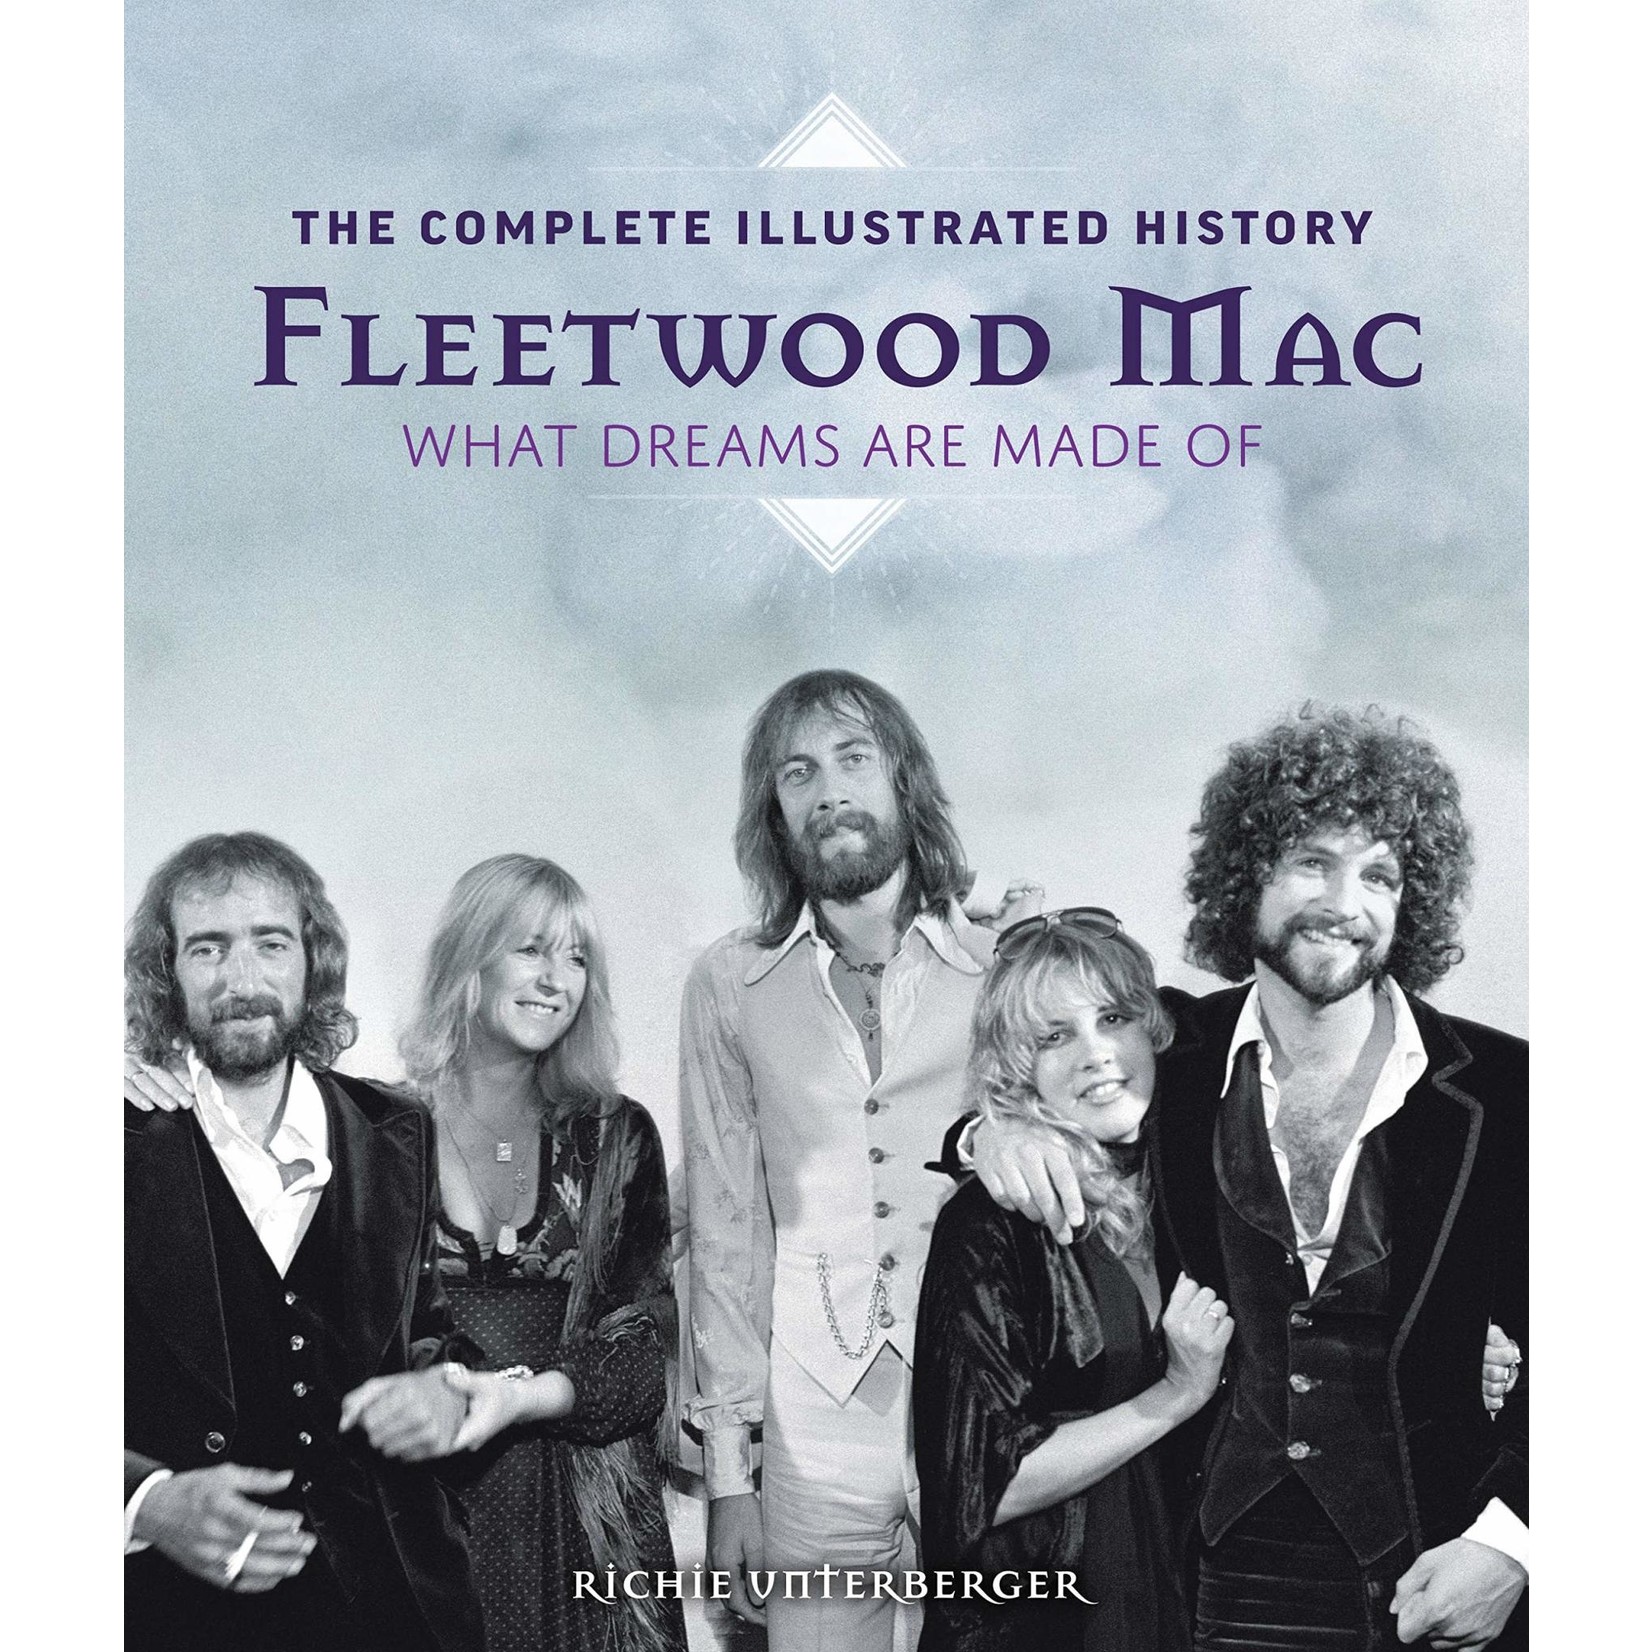 Fleetwood Mac - The Complete Illustrated History: What Dreams Are Made Of [Book]